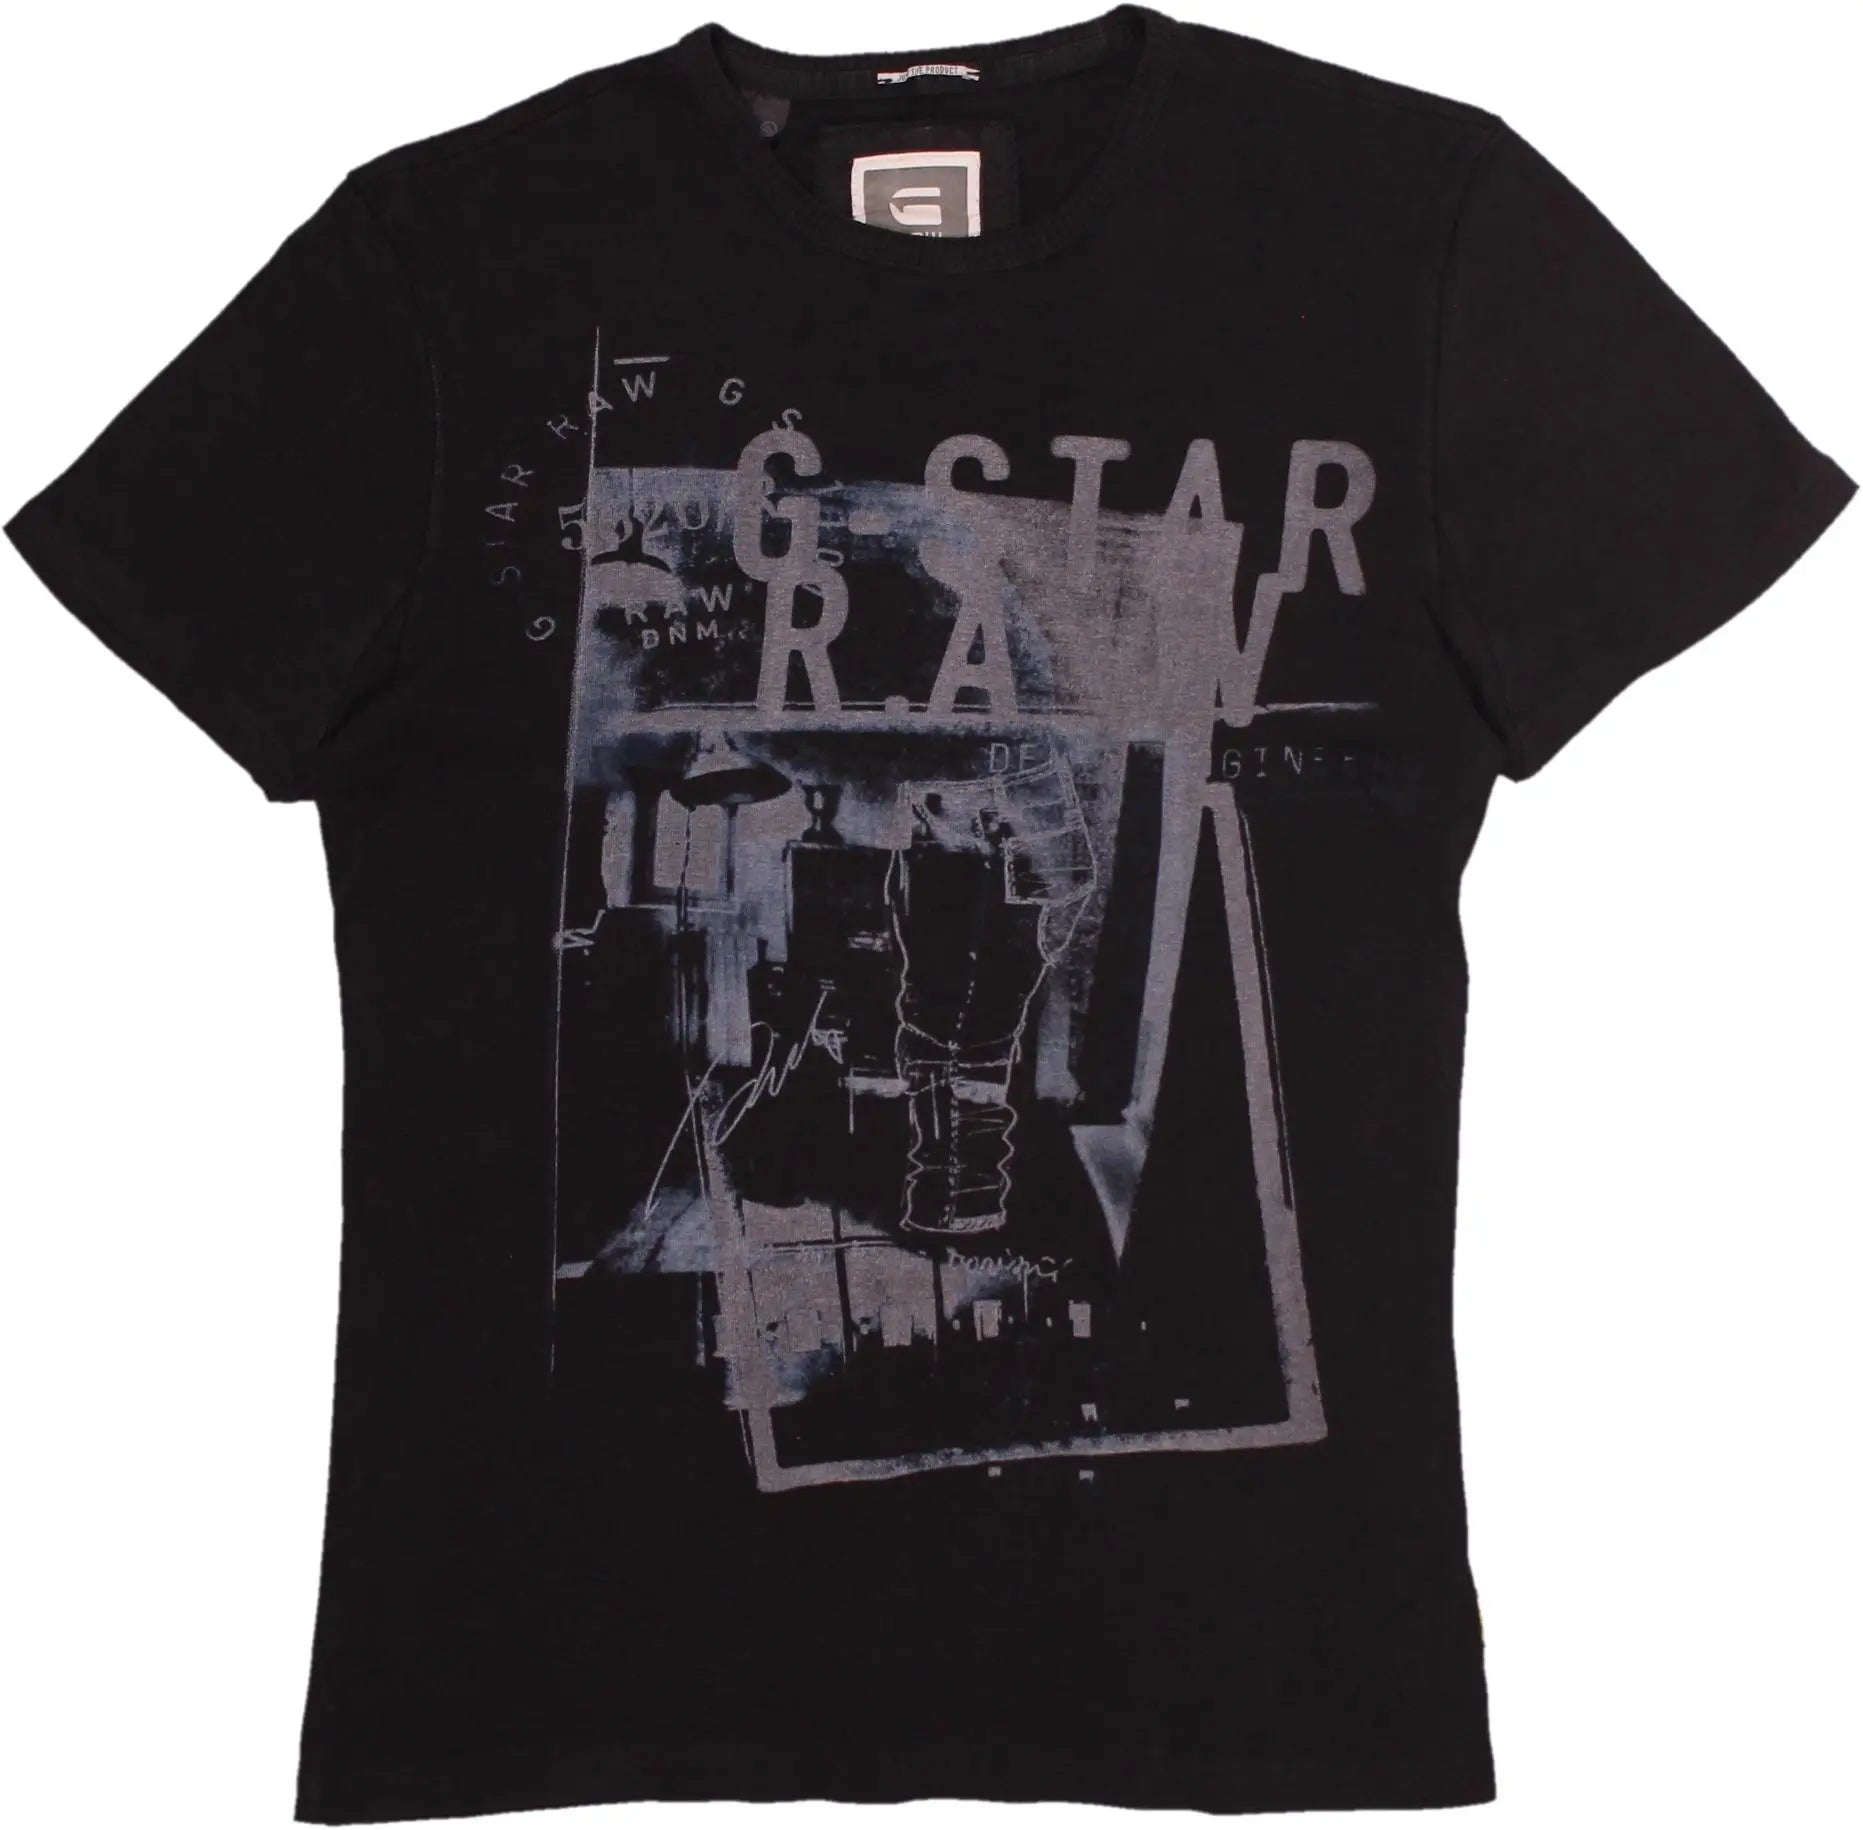 Pre-owned and vintage G-Star RAW